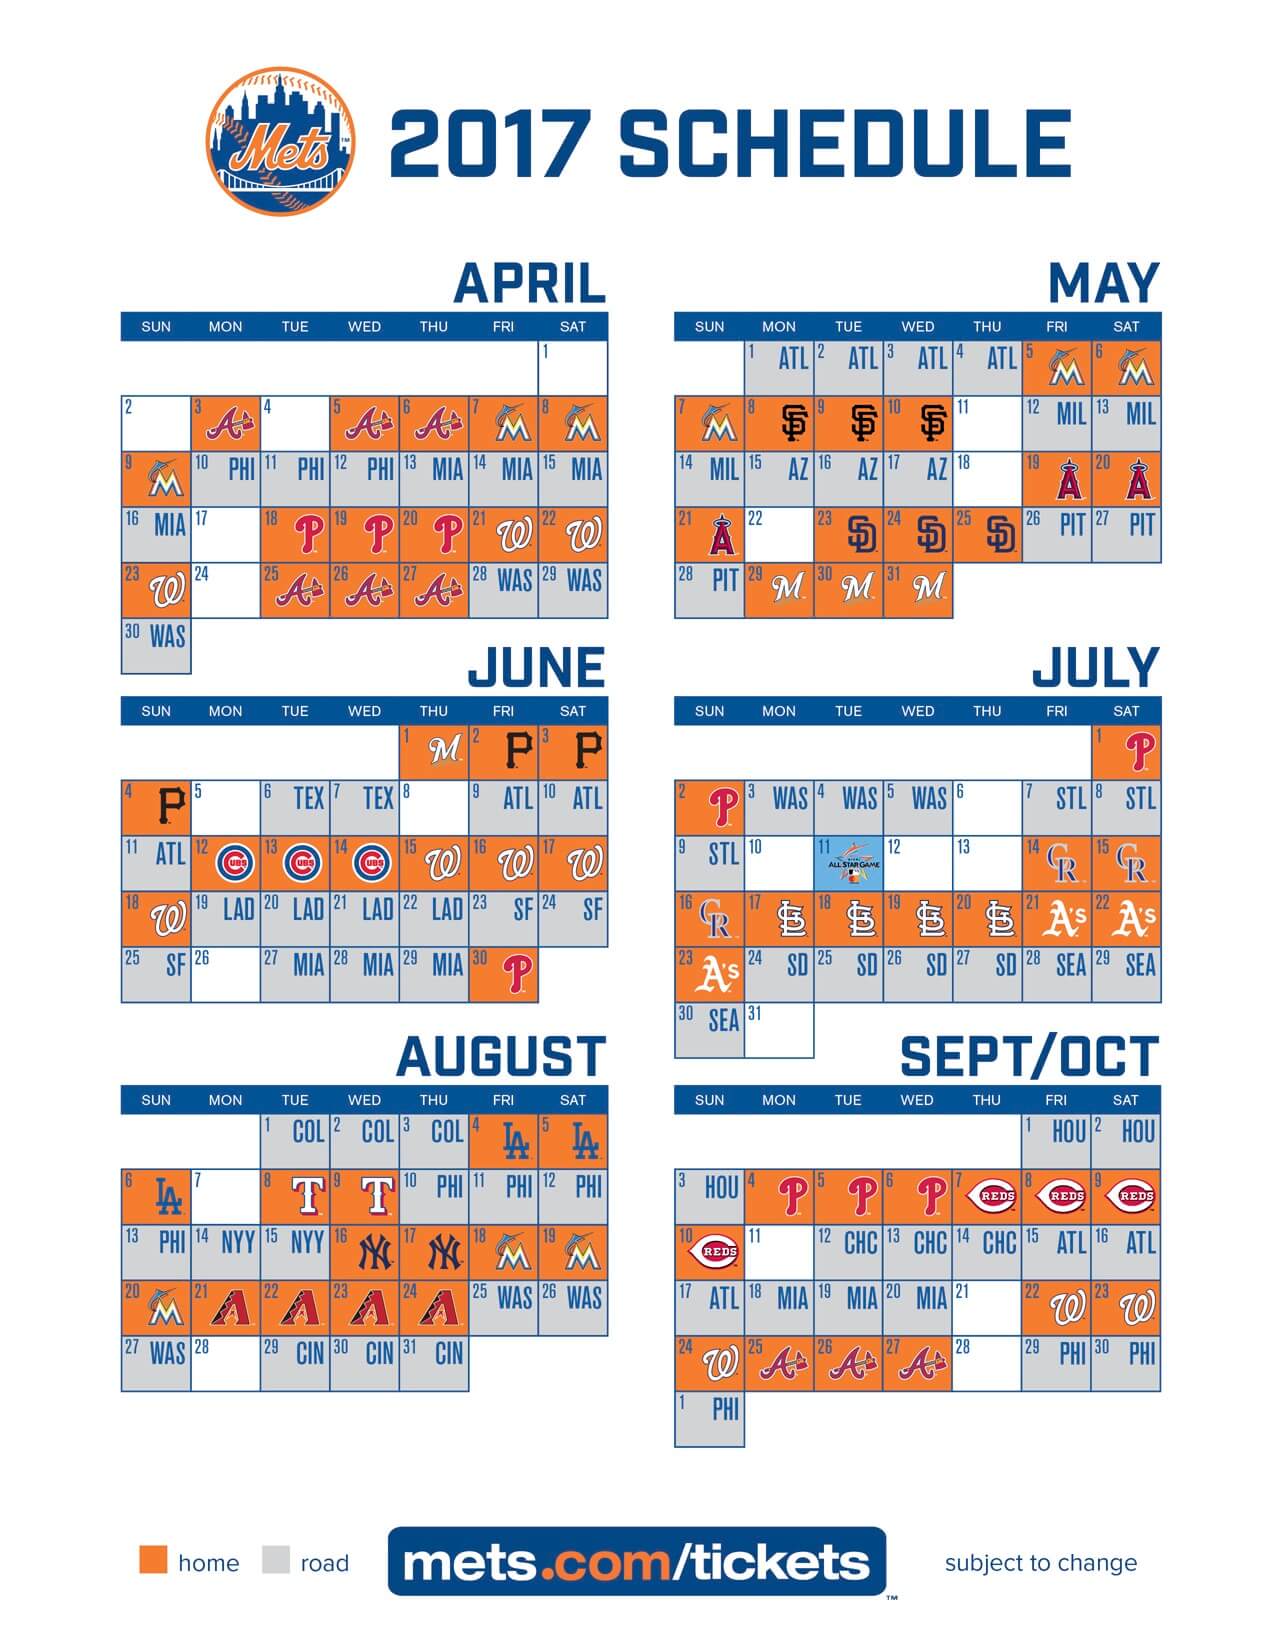 I too have The 2017 New York Mets baseball schedule! The Mets Police